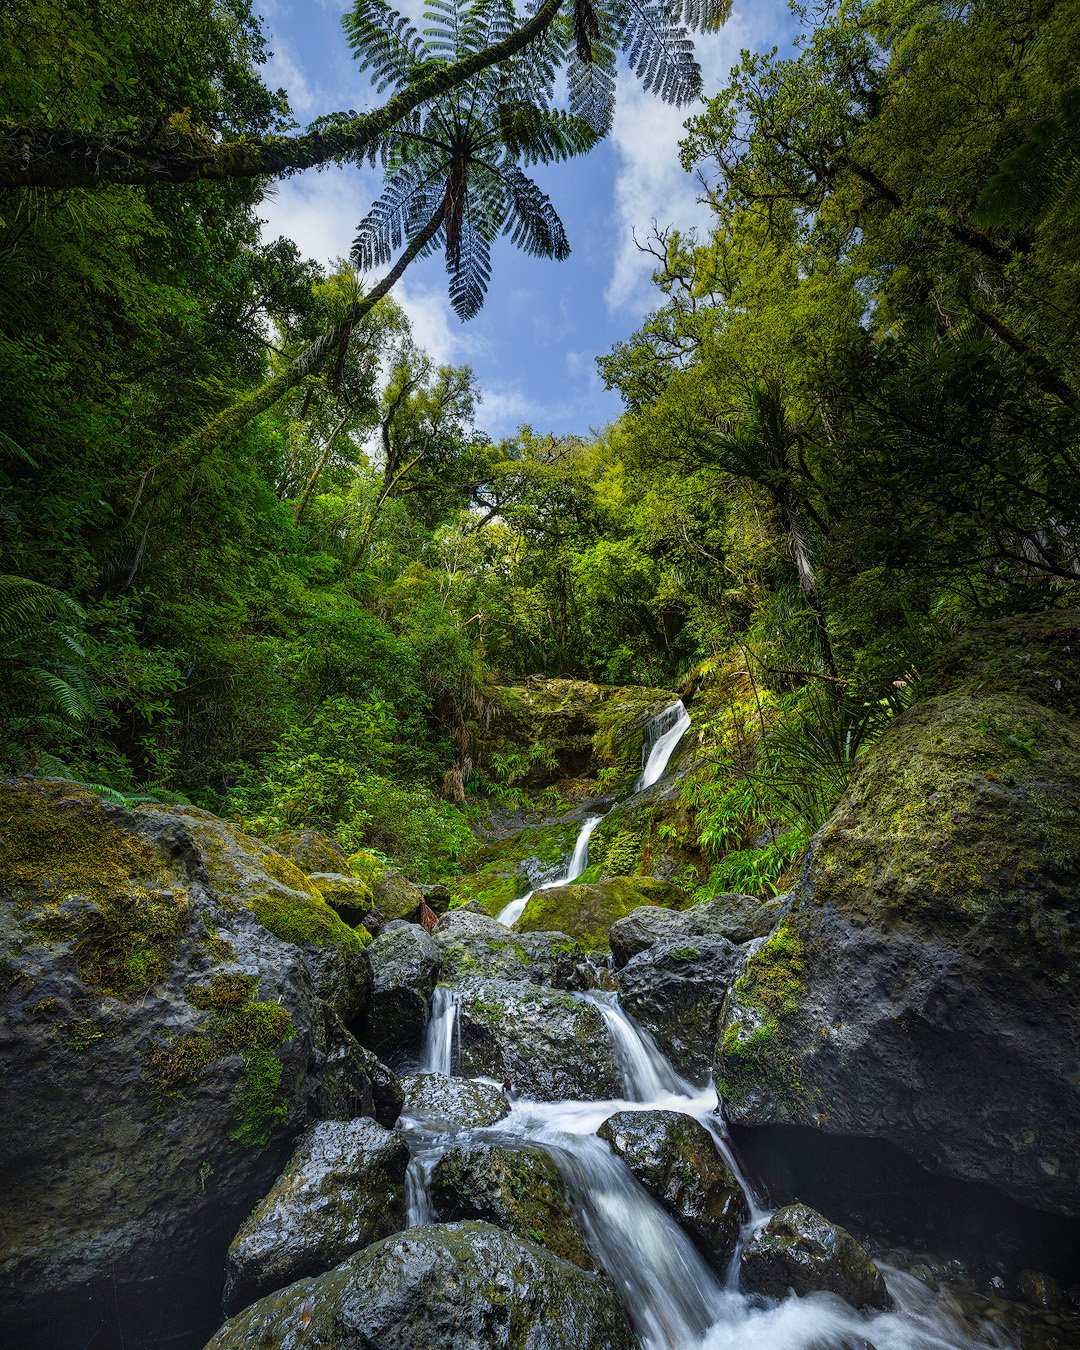 Waiotemarama Falls.

This waterfall was an unexpected find while exploring the west coast of Northland recently. The Waiotemarama Falls are accessible via a short walk through the forest. As you approach the falls, you'll be greeted by the soothing s